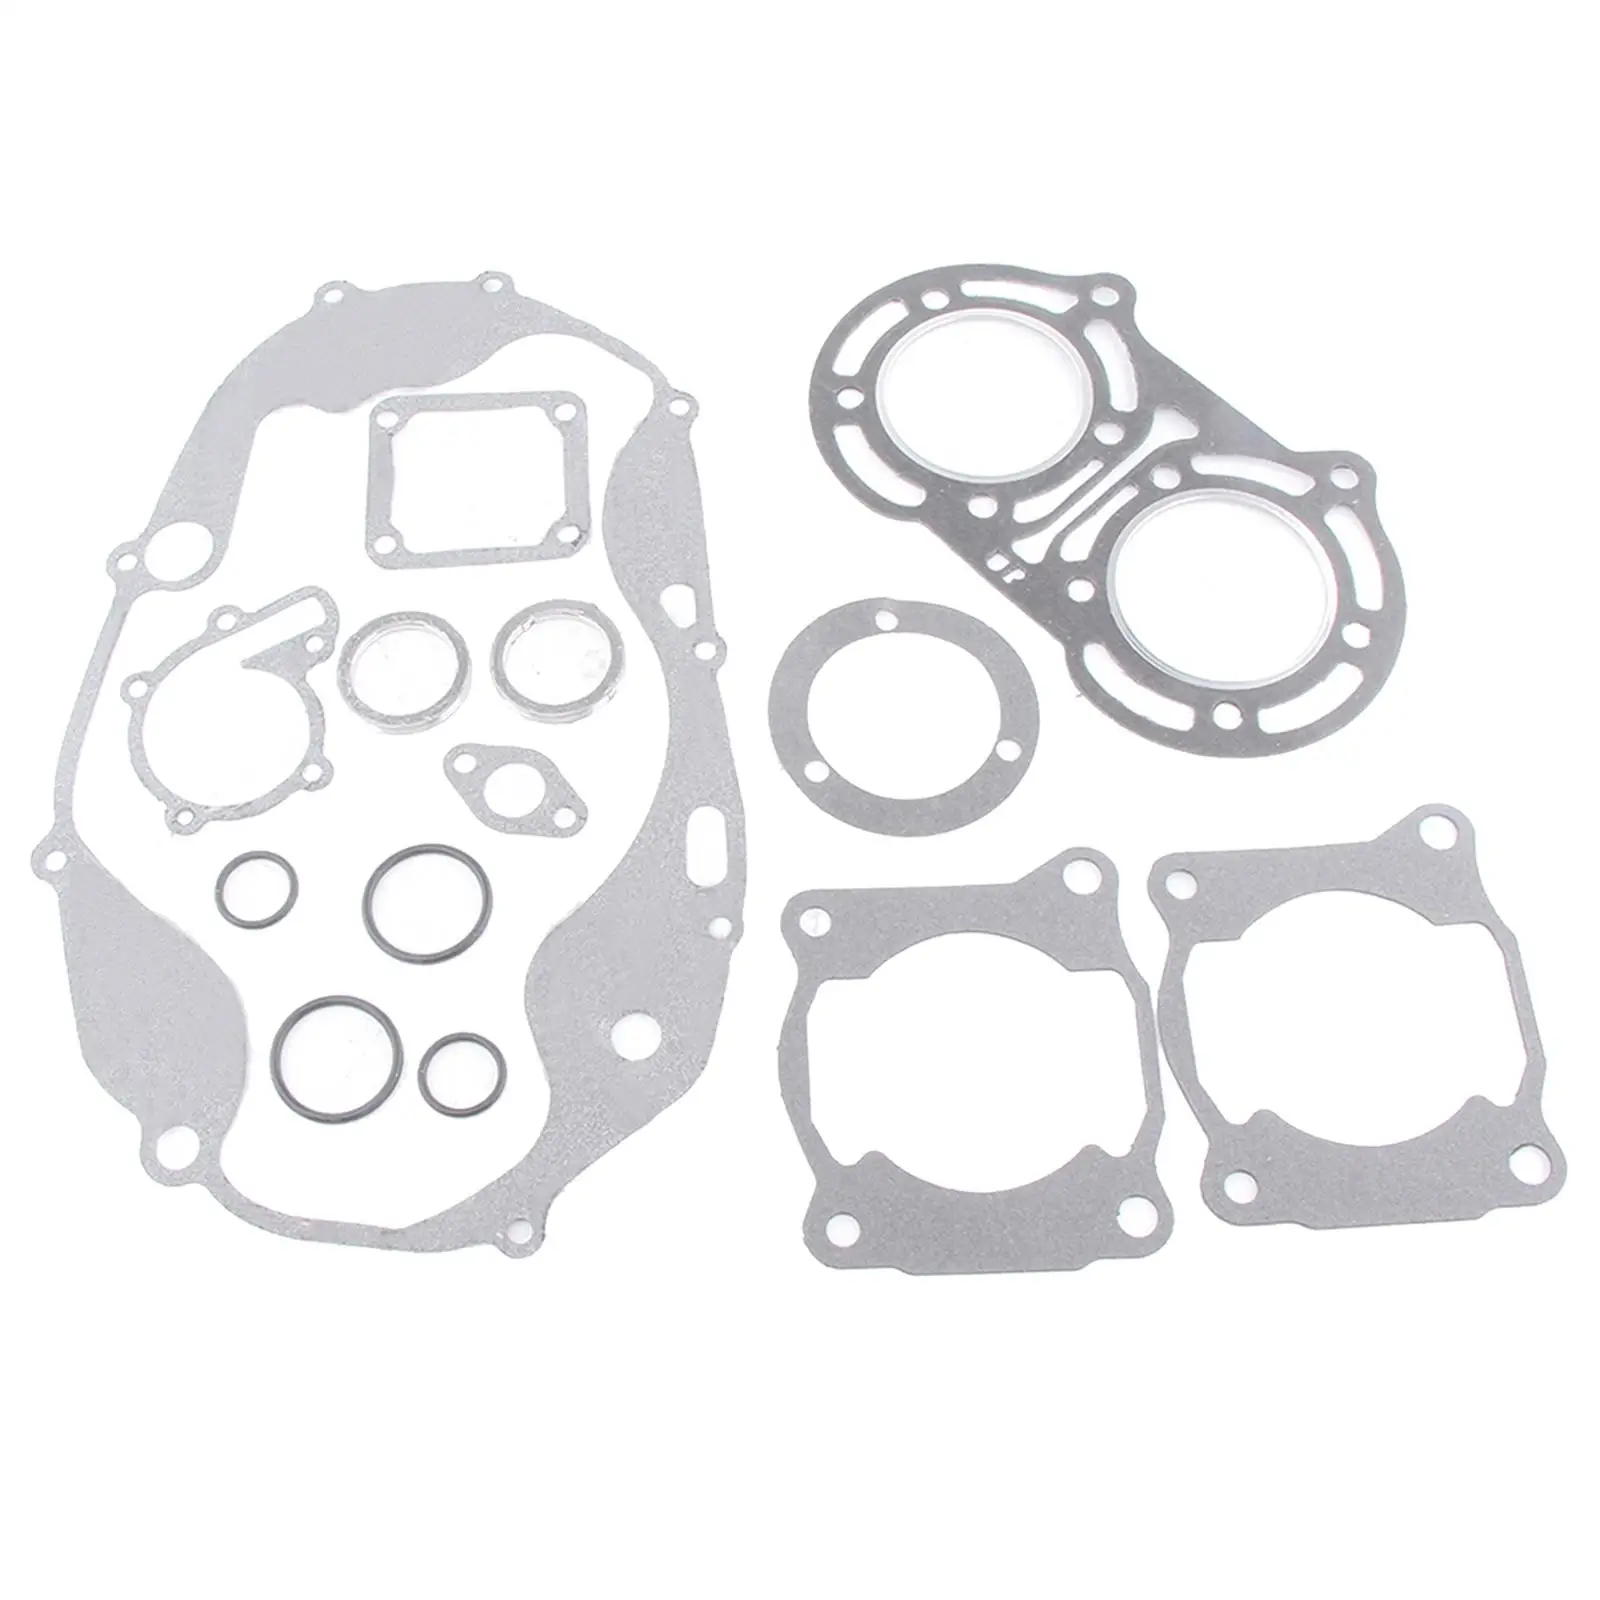 New Silver Replacement Complete Rebuild Engine Gasket Kit, Full Set, for Yamaha ATV YFZ350, Banshee 350 87-06 GS34